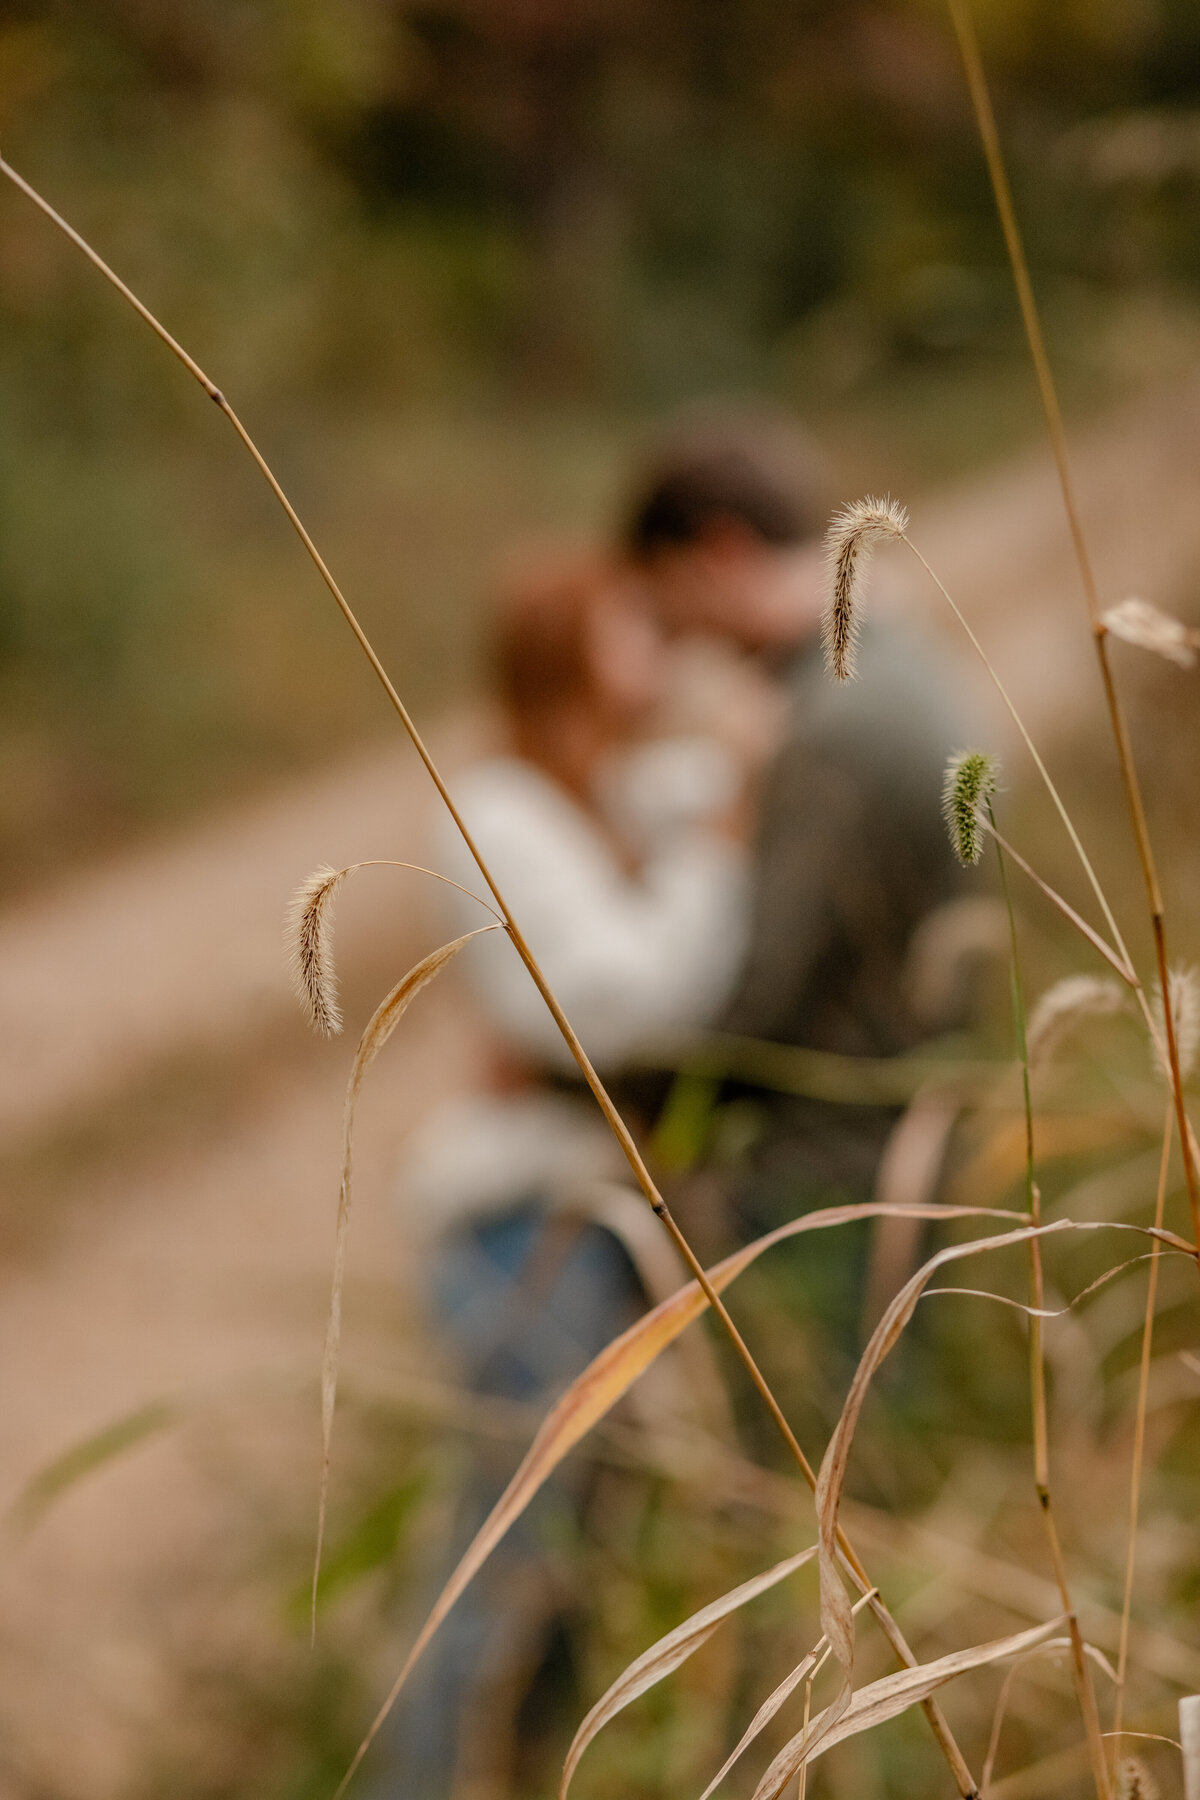 Engagement Photoshoot, Couples' Photography Session, Candid Engagement Photos, Professional Couples' Photographer, Pre-Wedding Photography, Creative Engagement Shots, Traditional Engagement Photos, Black and White Engagement Photos, Couples' Photographer Portfolio, Documentary Style Engagement Photography, Vintage Engagement Photography, Modern Engagement Photography, Rustic Engagement Photography, Romantic Couples' Photos, Outdoor Engagement Photography, Indoor Engagement Photography, Destination Engagement Photos, Unique Engagement Photo Ideas, Engagement Photos with Pets, Sunset Engagement Photography, Southern Illinois Engagement Photographer, Engagement Photographer in Carbondale, Marion IL Engagement Photography, Engagement Photos in Paducah KY, Mt Vernon IL Engagement Photos, Engagement Photography in Cape Girardeau MO, Evansville IN Engagement Photographer, St Louis MO Engagement Photos, Engagement Photographer near Harrisburg IL, Engagement Photos at Giant City State Park, Shawnee National Forest Engagement Photographer, Engagement Photos at Rend Lake, Southern Illinois University Engagement Photos, Engagement Photography in Metropolis IL, Engagement Photographer in Southern Illinois Wine Trail, Engagement Photos in Perry County, Garden of the Gods Illinois Engagement Photography, Engagement Photographer in Franklin County IL, Jackson County IL Engagement Photos, Engagement Photographer in Williamson County IL